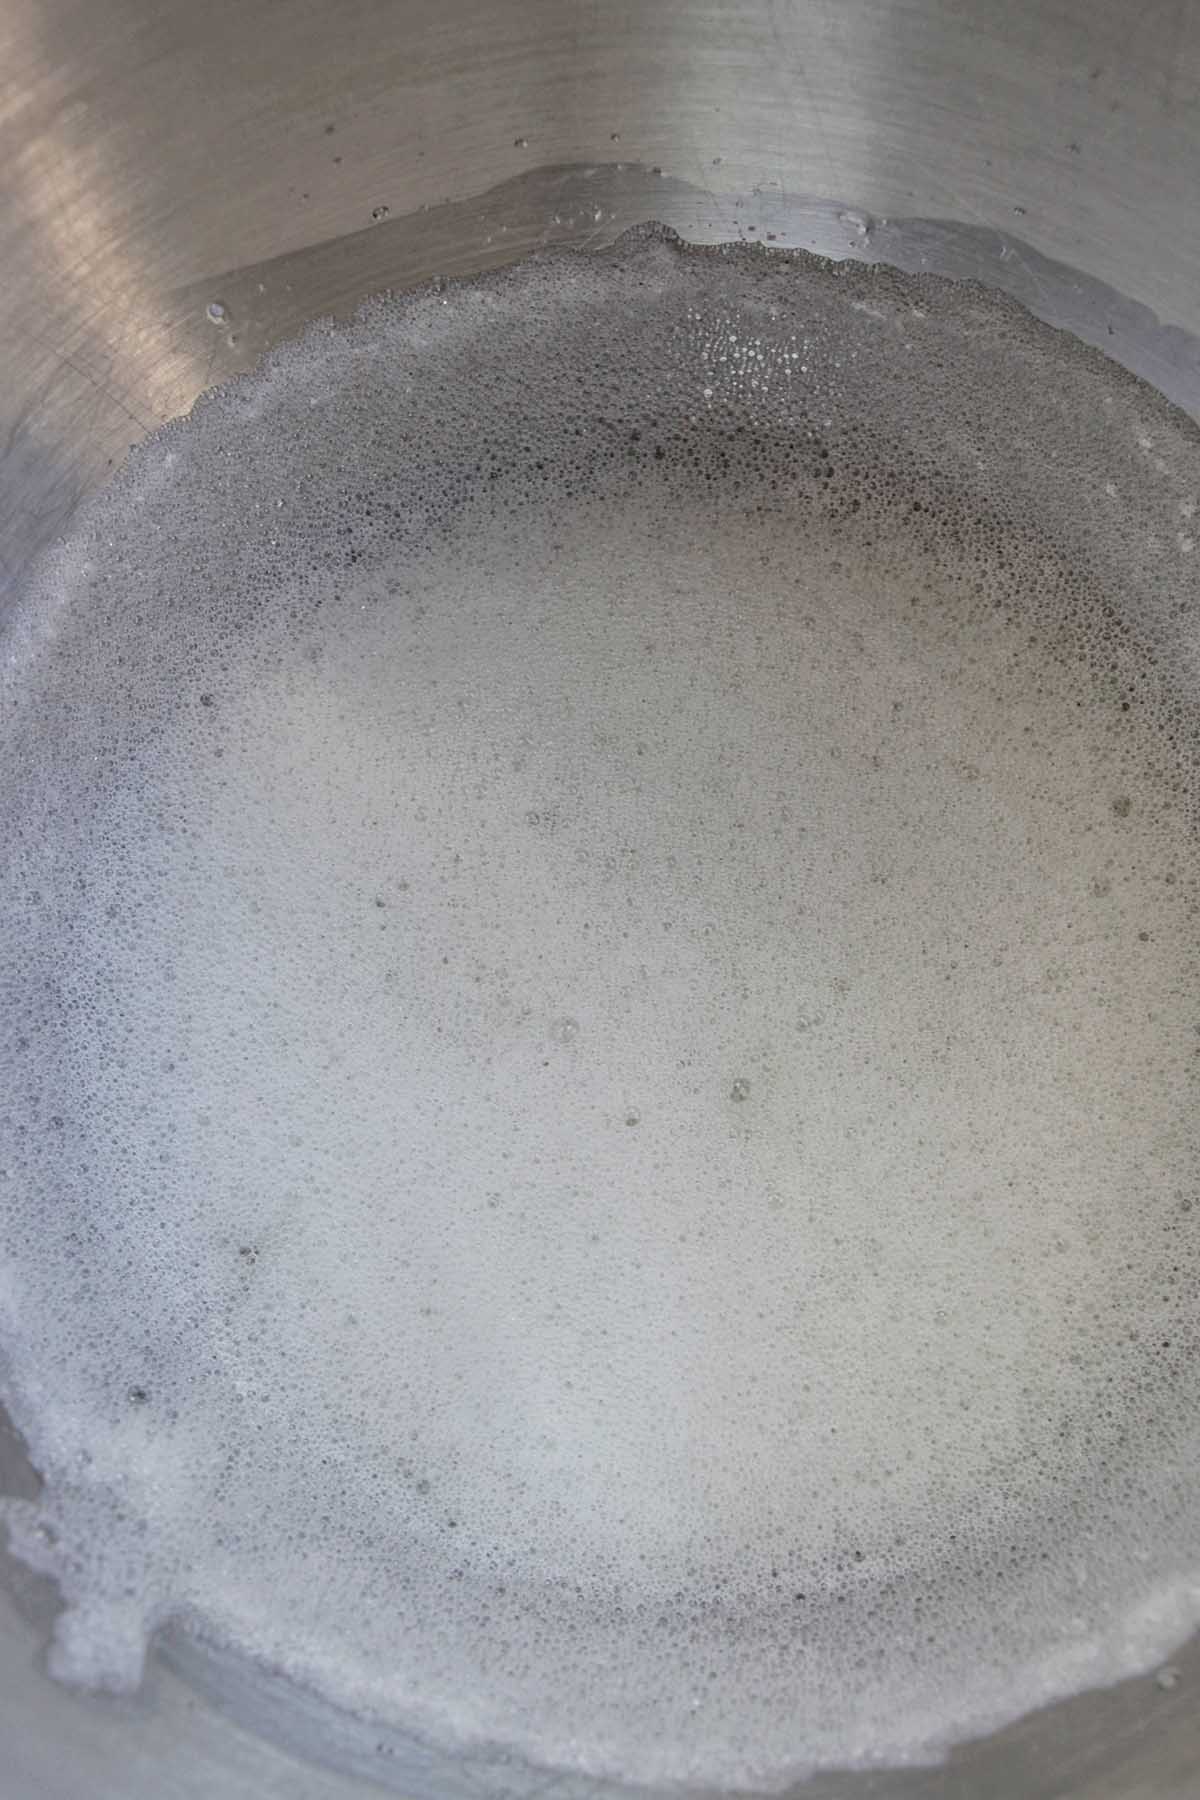 foamy egg whites in a metal mixing bowl.